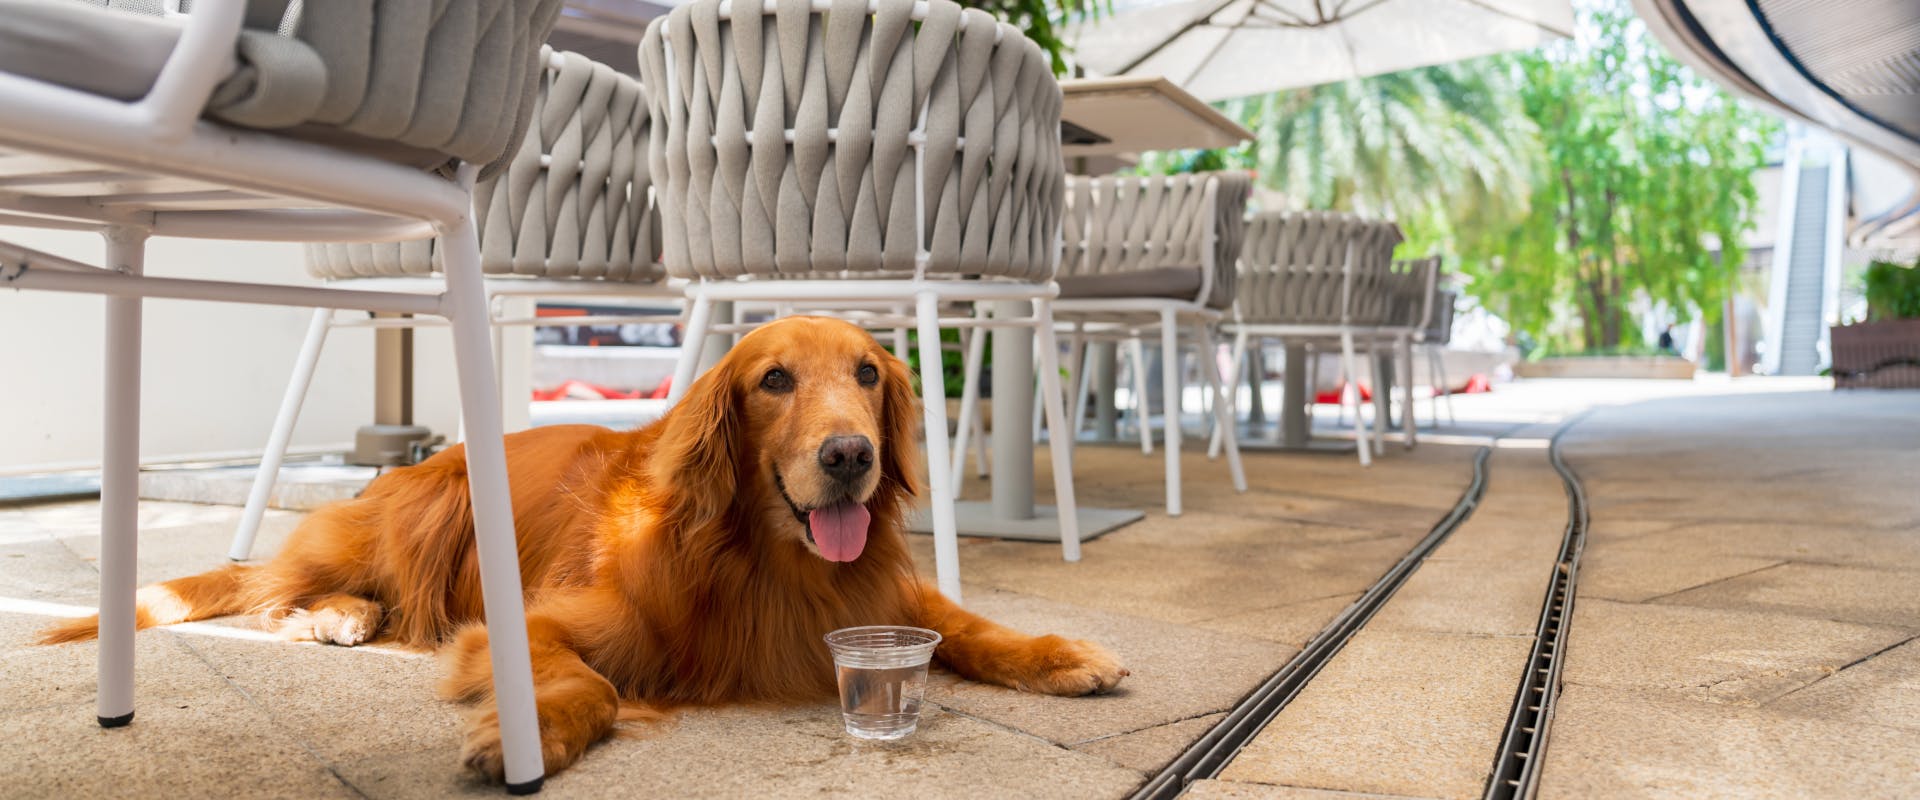 Golden retriever lying out the outdoor patio of a dog friendly restaurant.